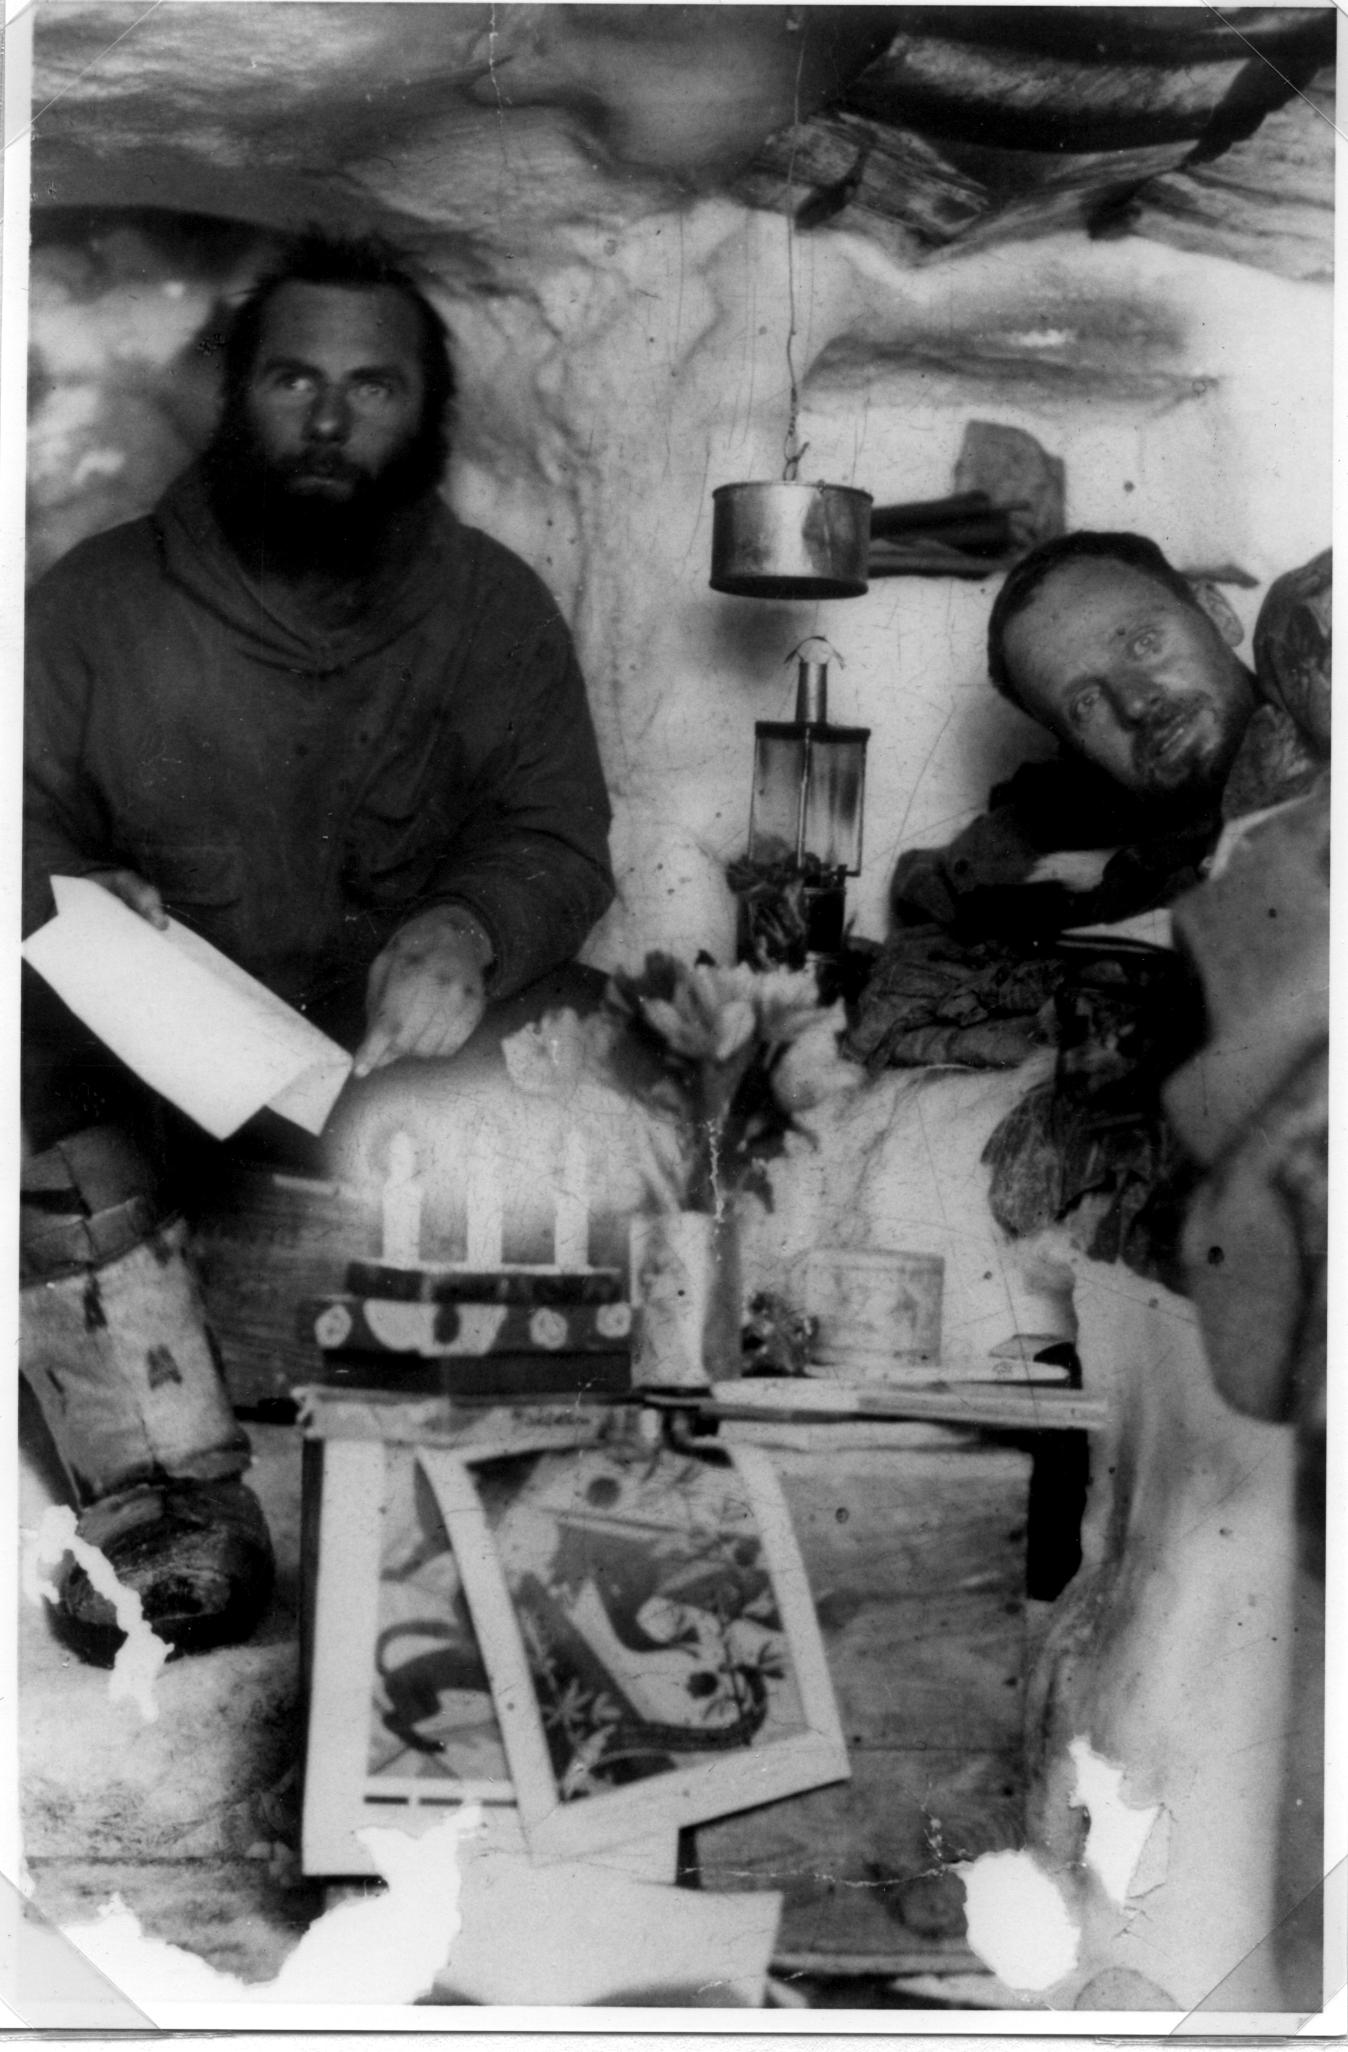 Dr Fritz Loewe (right) in the 'Eismitte' camp, 1930-31 Greenland Expedition